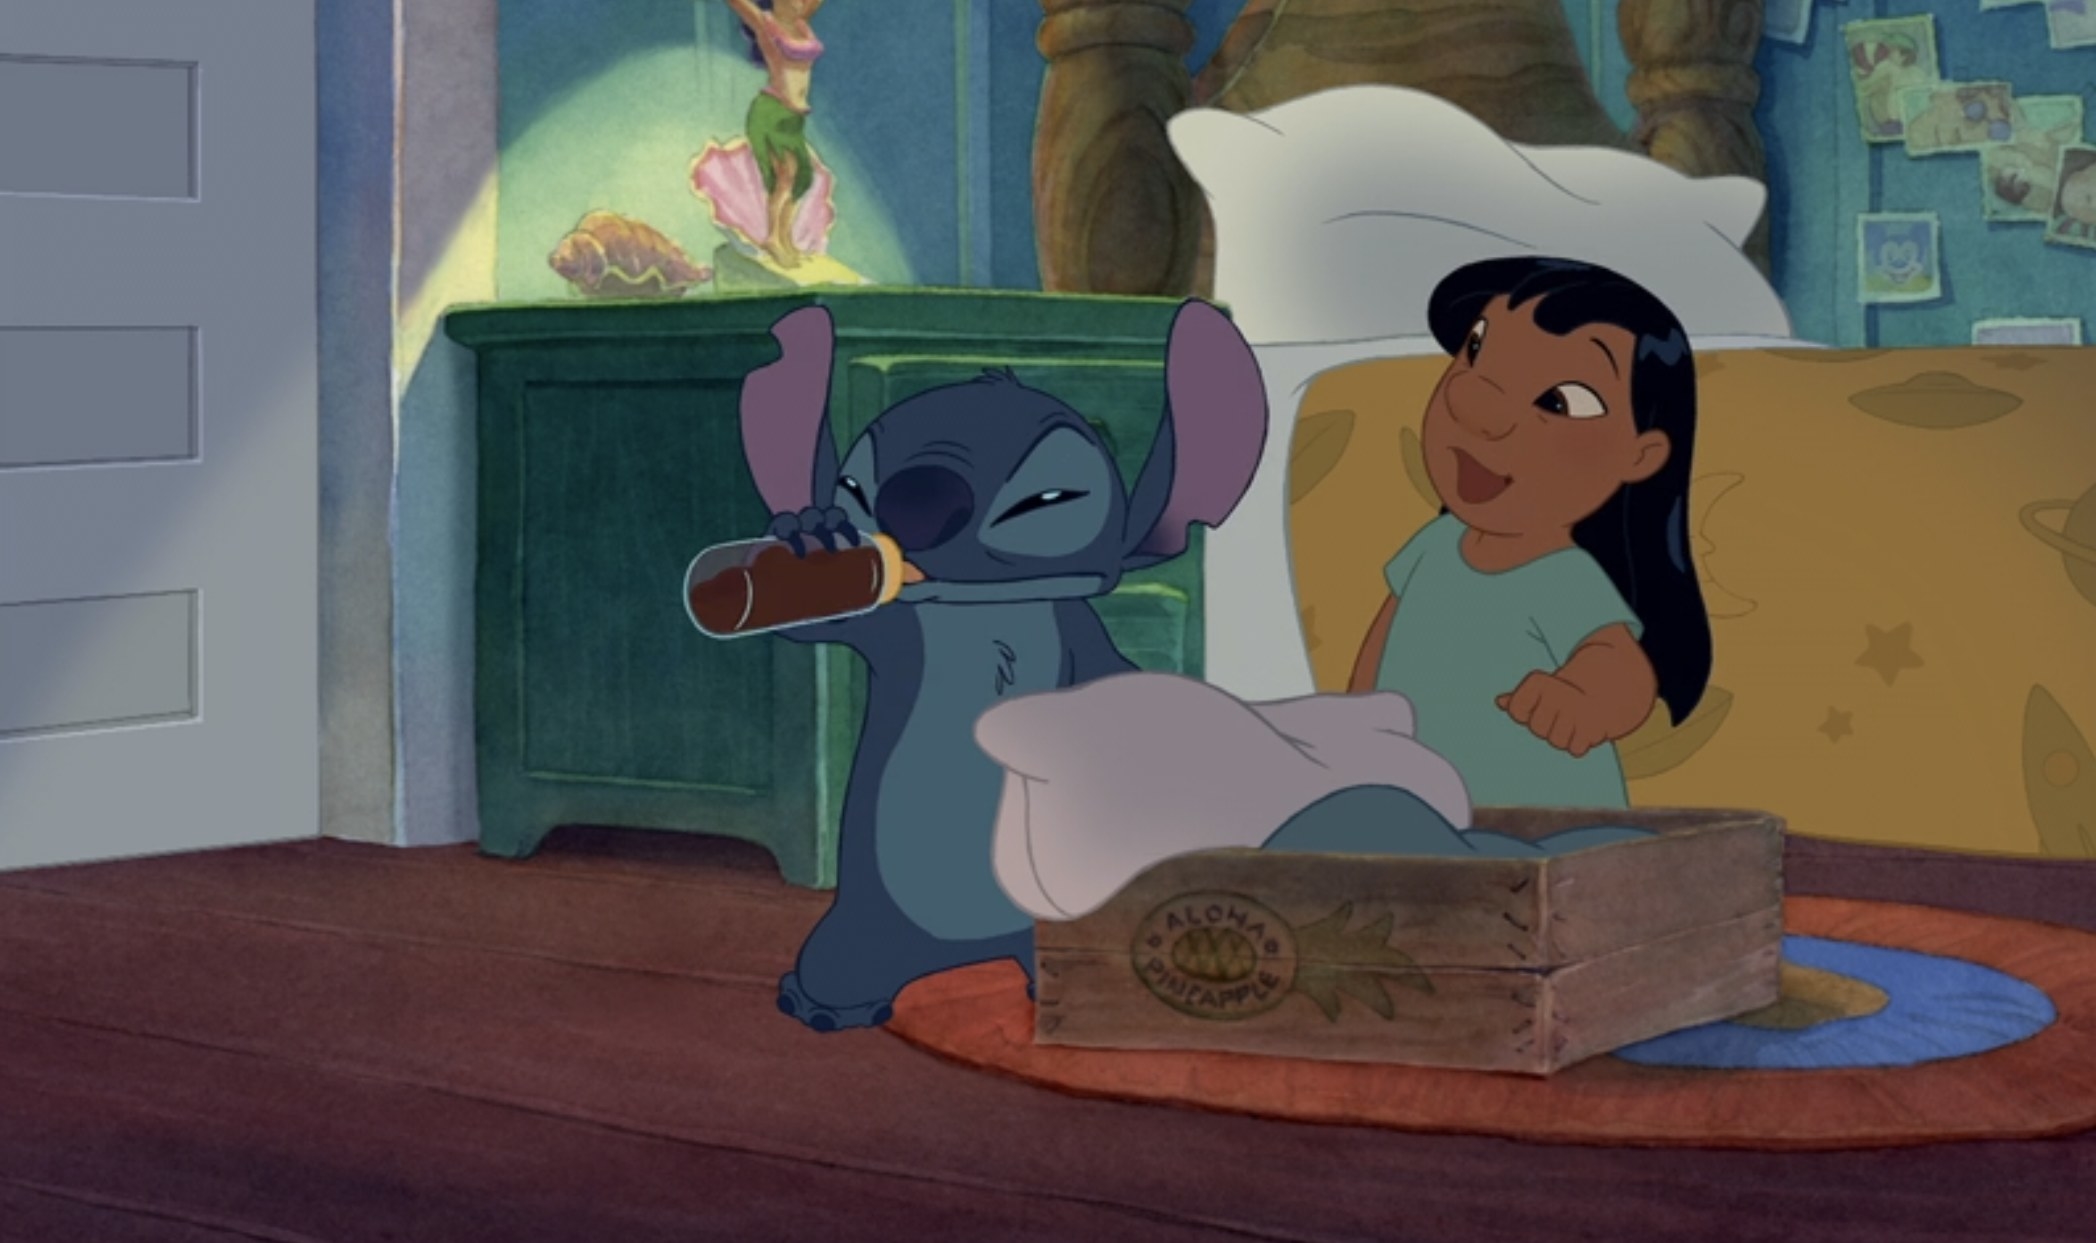 Stitch drinking coffee out of a bottle